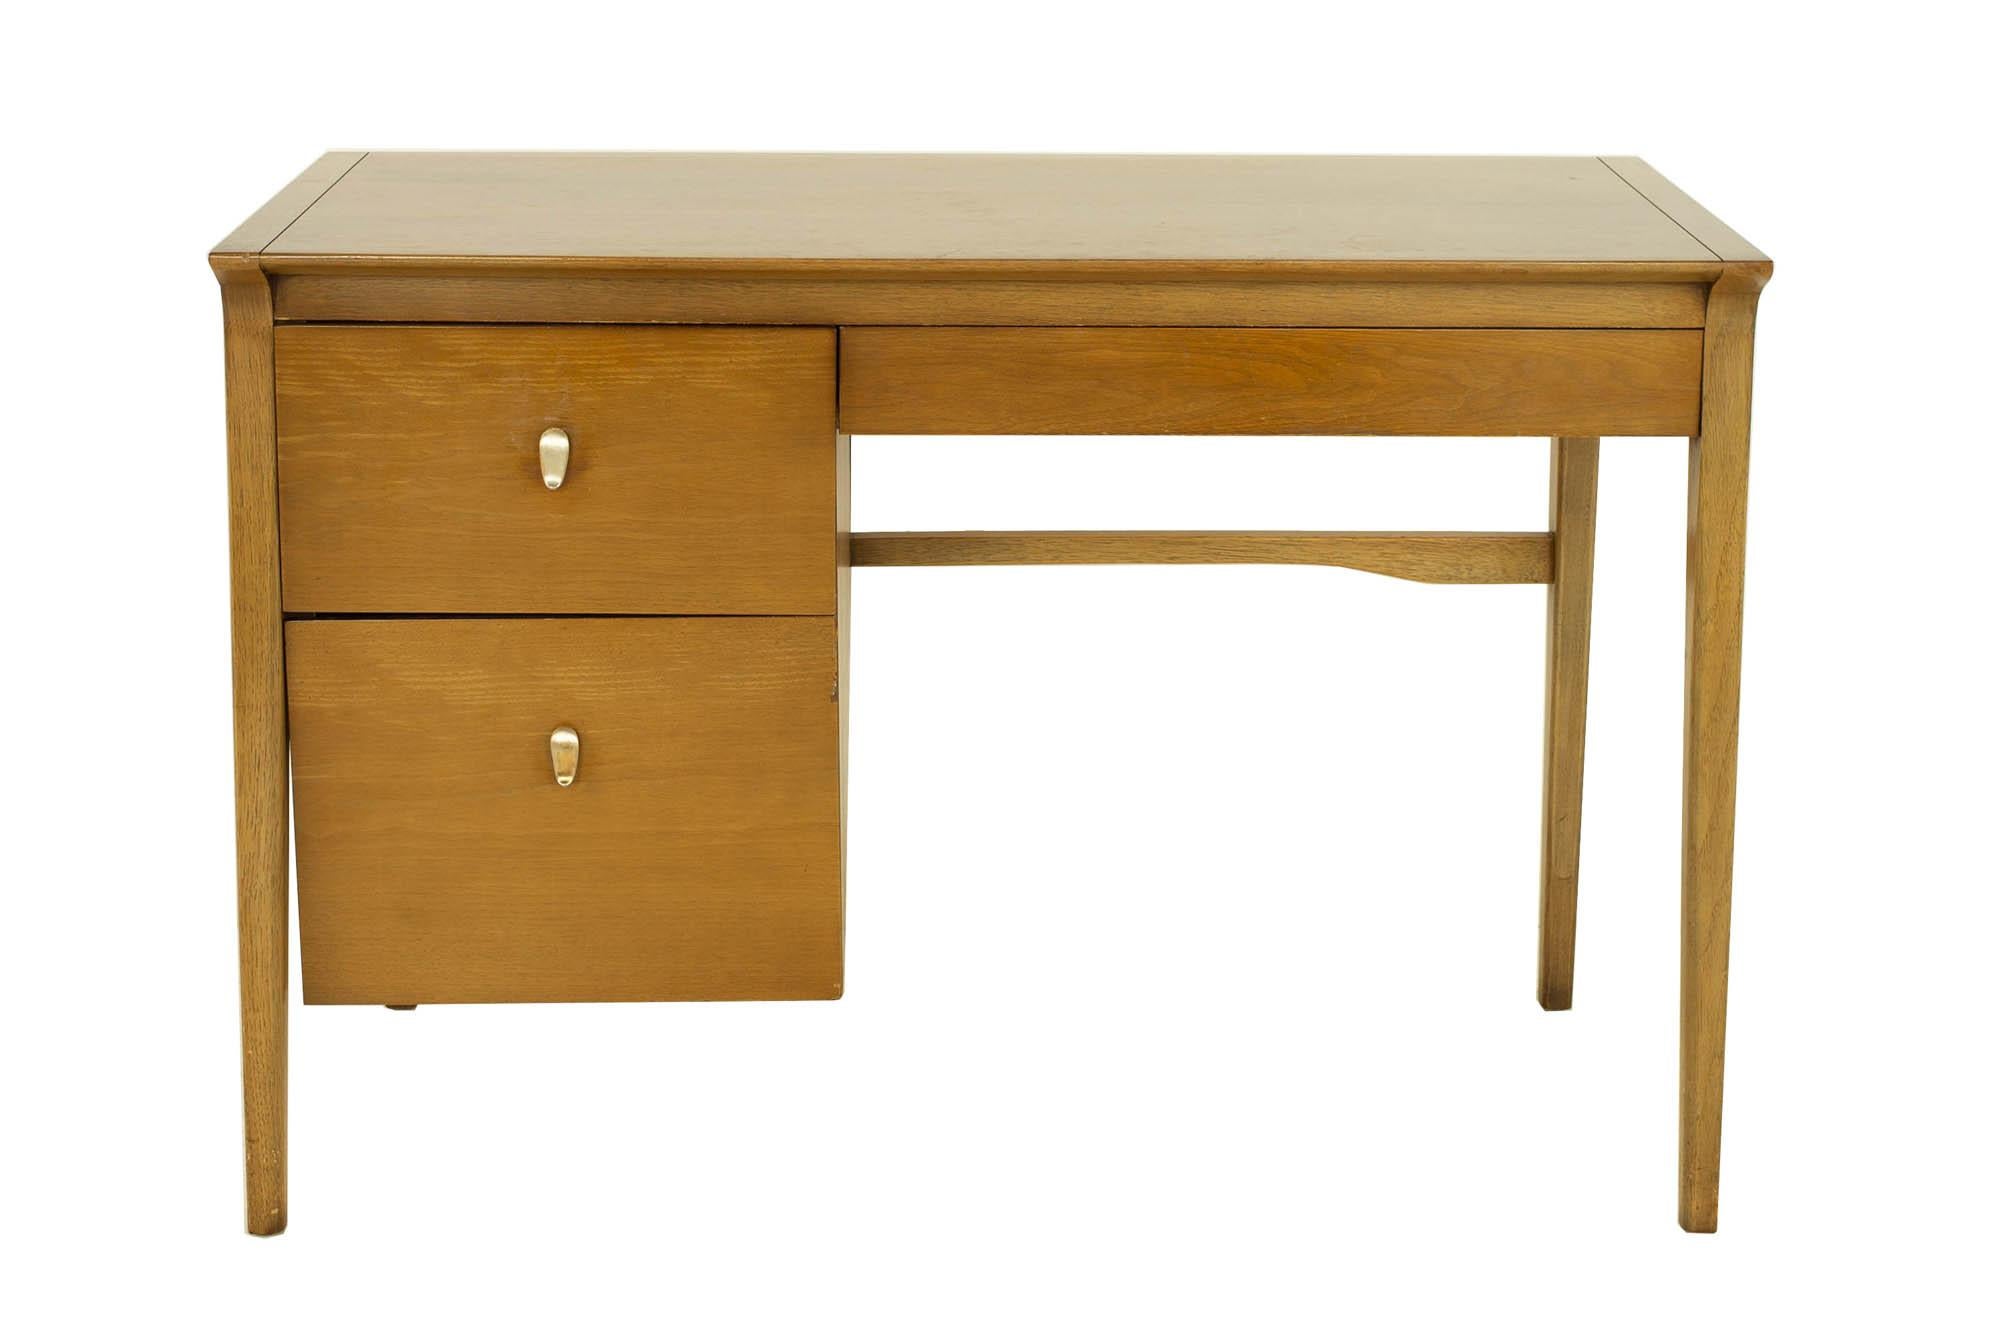 John Van Koert for Drexel mid century desk

This desk measures: 44 wide x 20.75 deep x 29.75 inches high, with a chair clearance of 24.25 inches

?All pieces of furniture can be had in what we call restored vintage condition. That means the